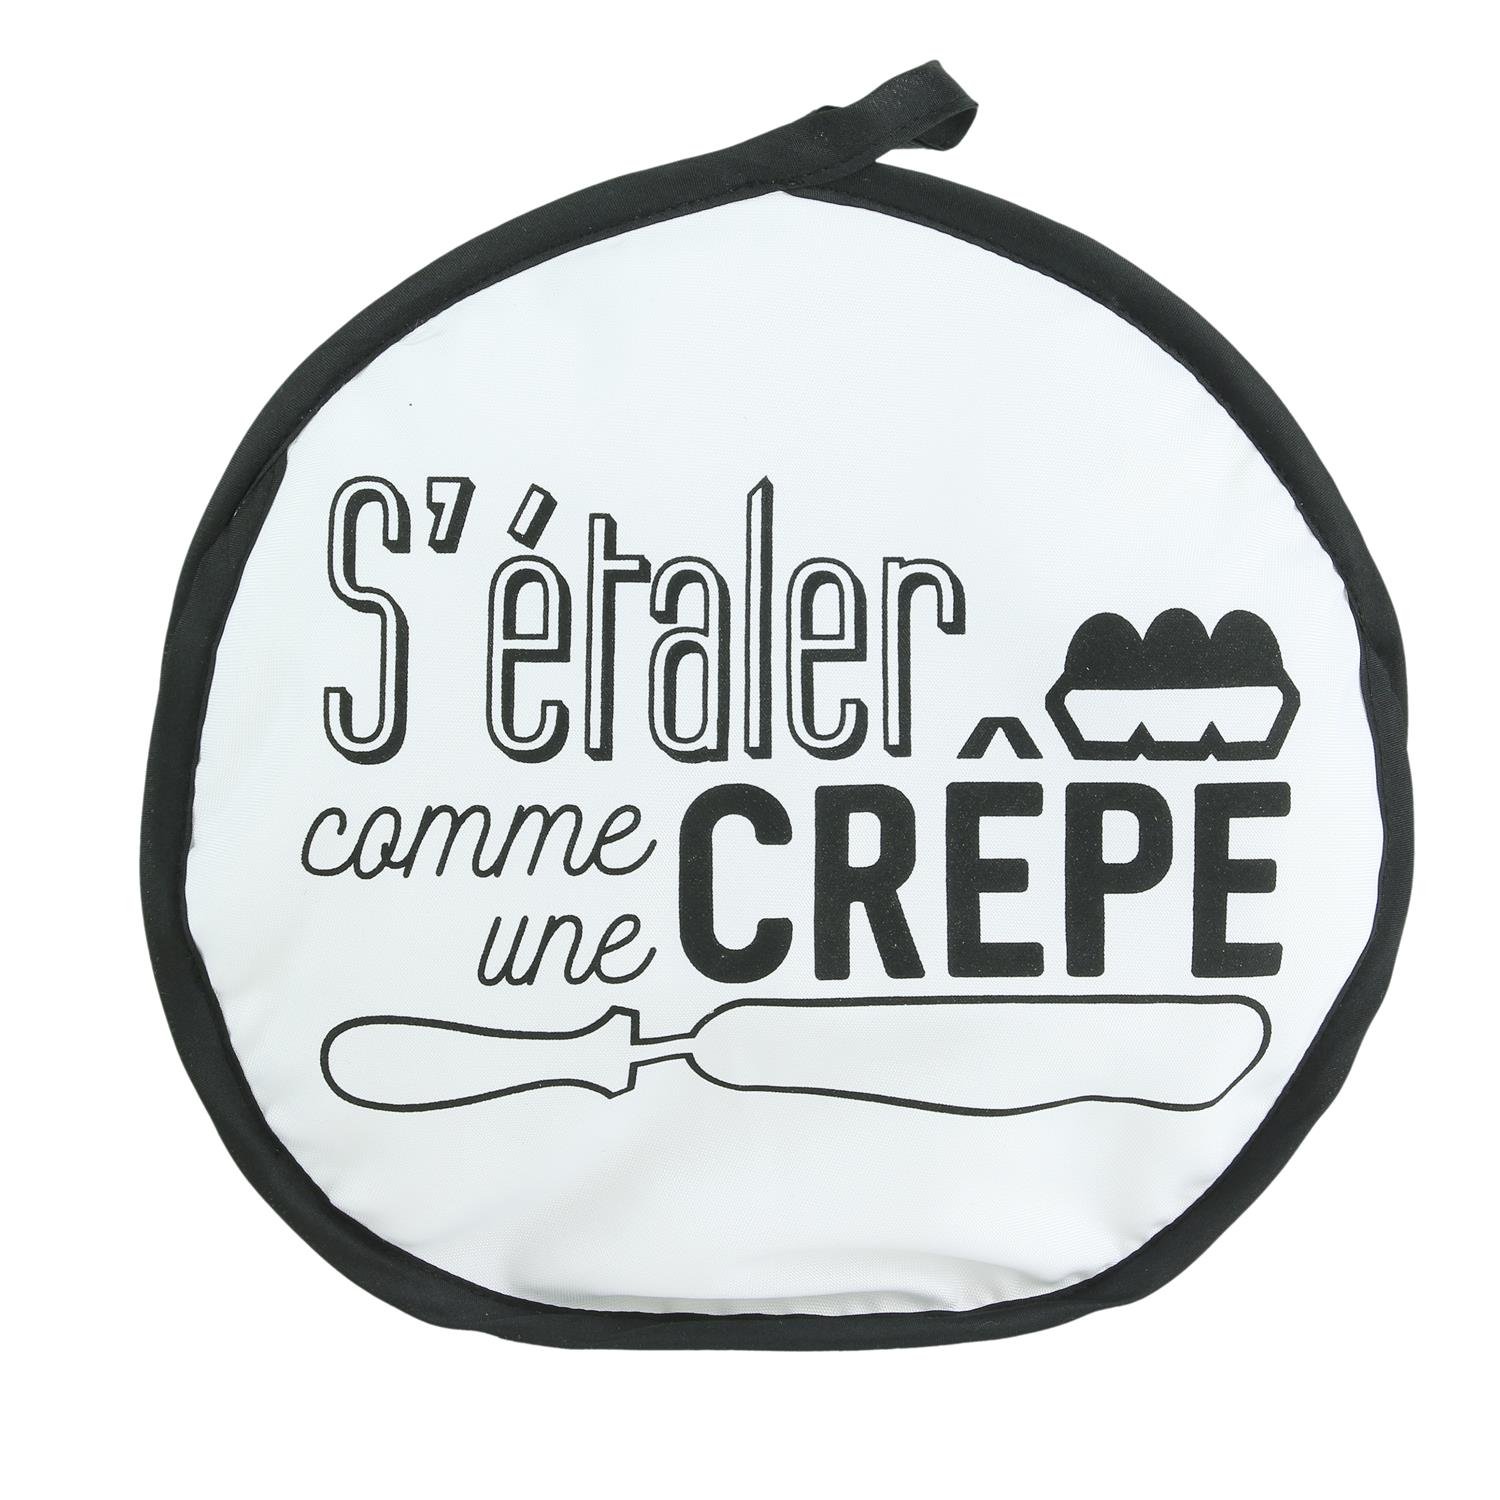 chauffe-crepe-express-totally-adict